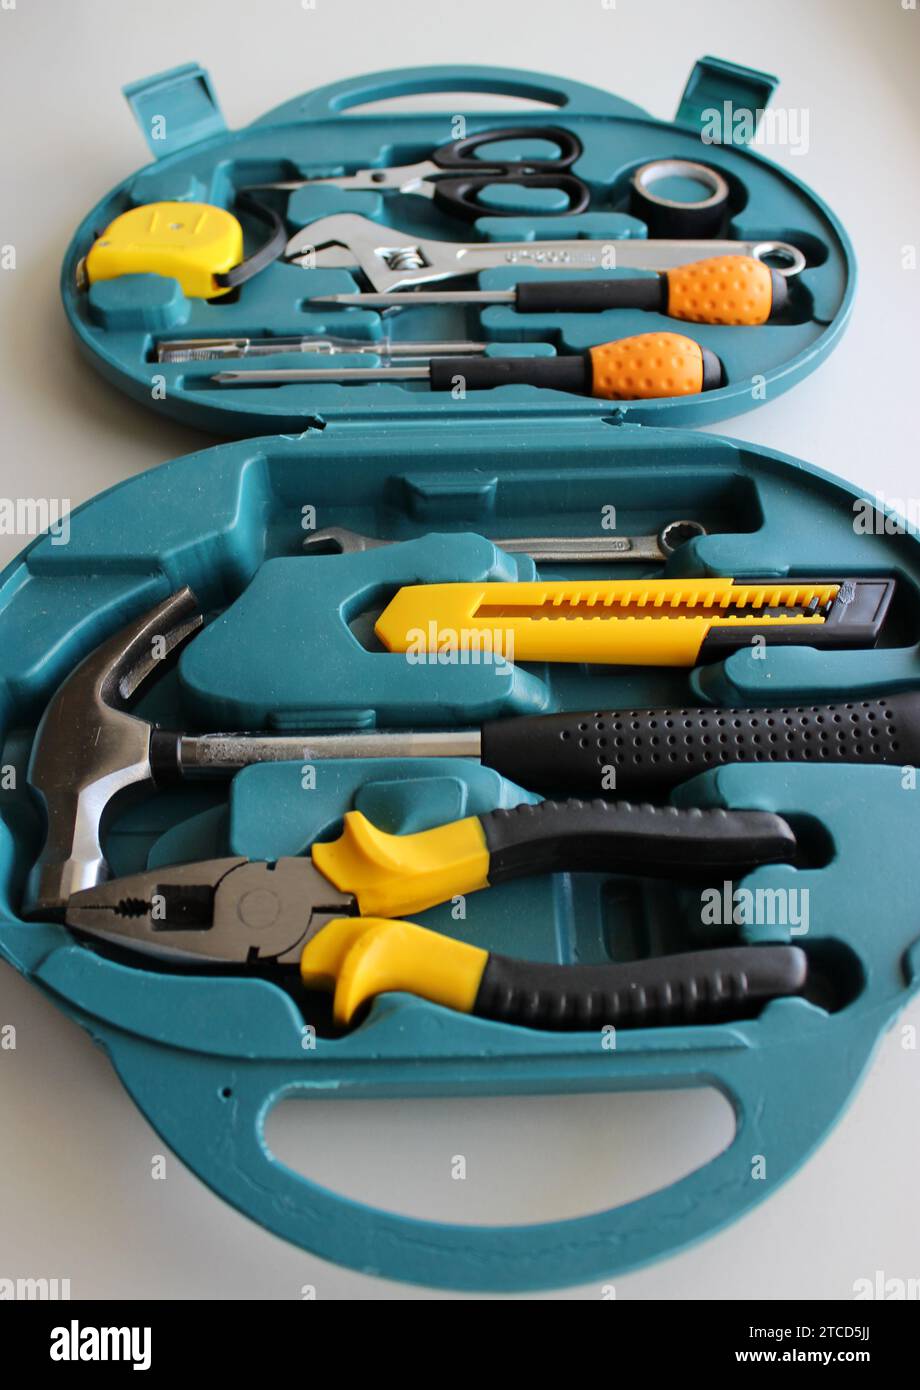 Home Electric Repairing Tools Arranged In Opened Plastic Box Vertical Stock Photo Stock Photo